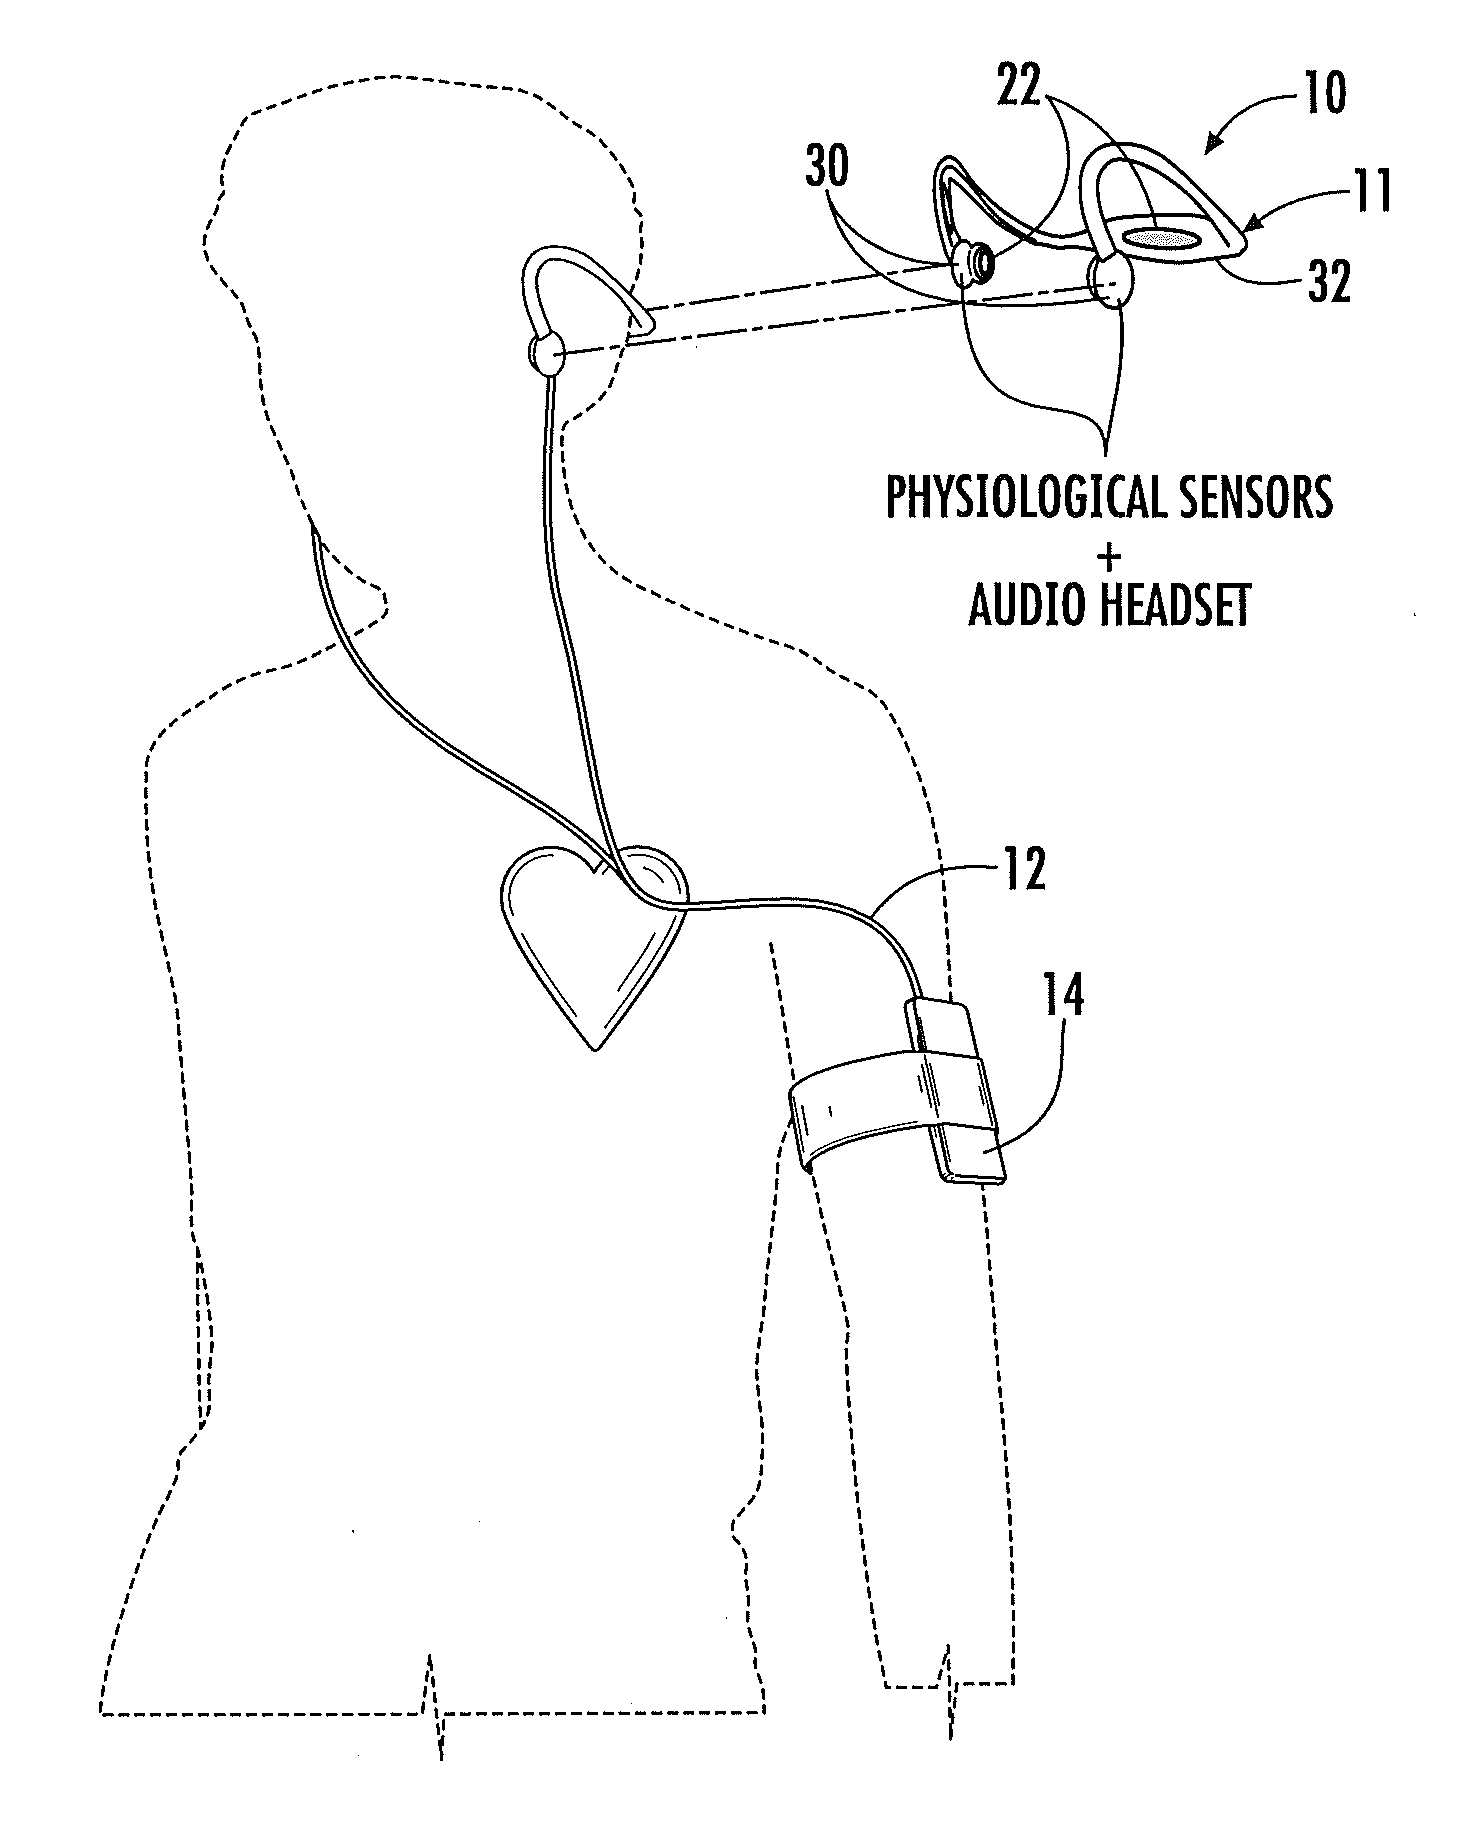 Monitoring apparatus and methods for measuring physiological and/or environmental conditions